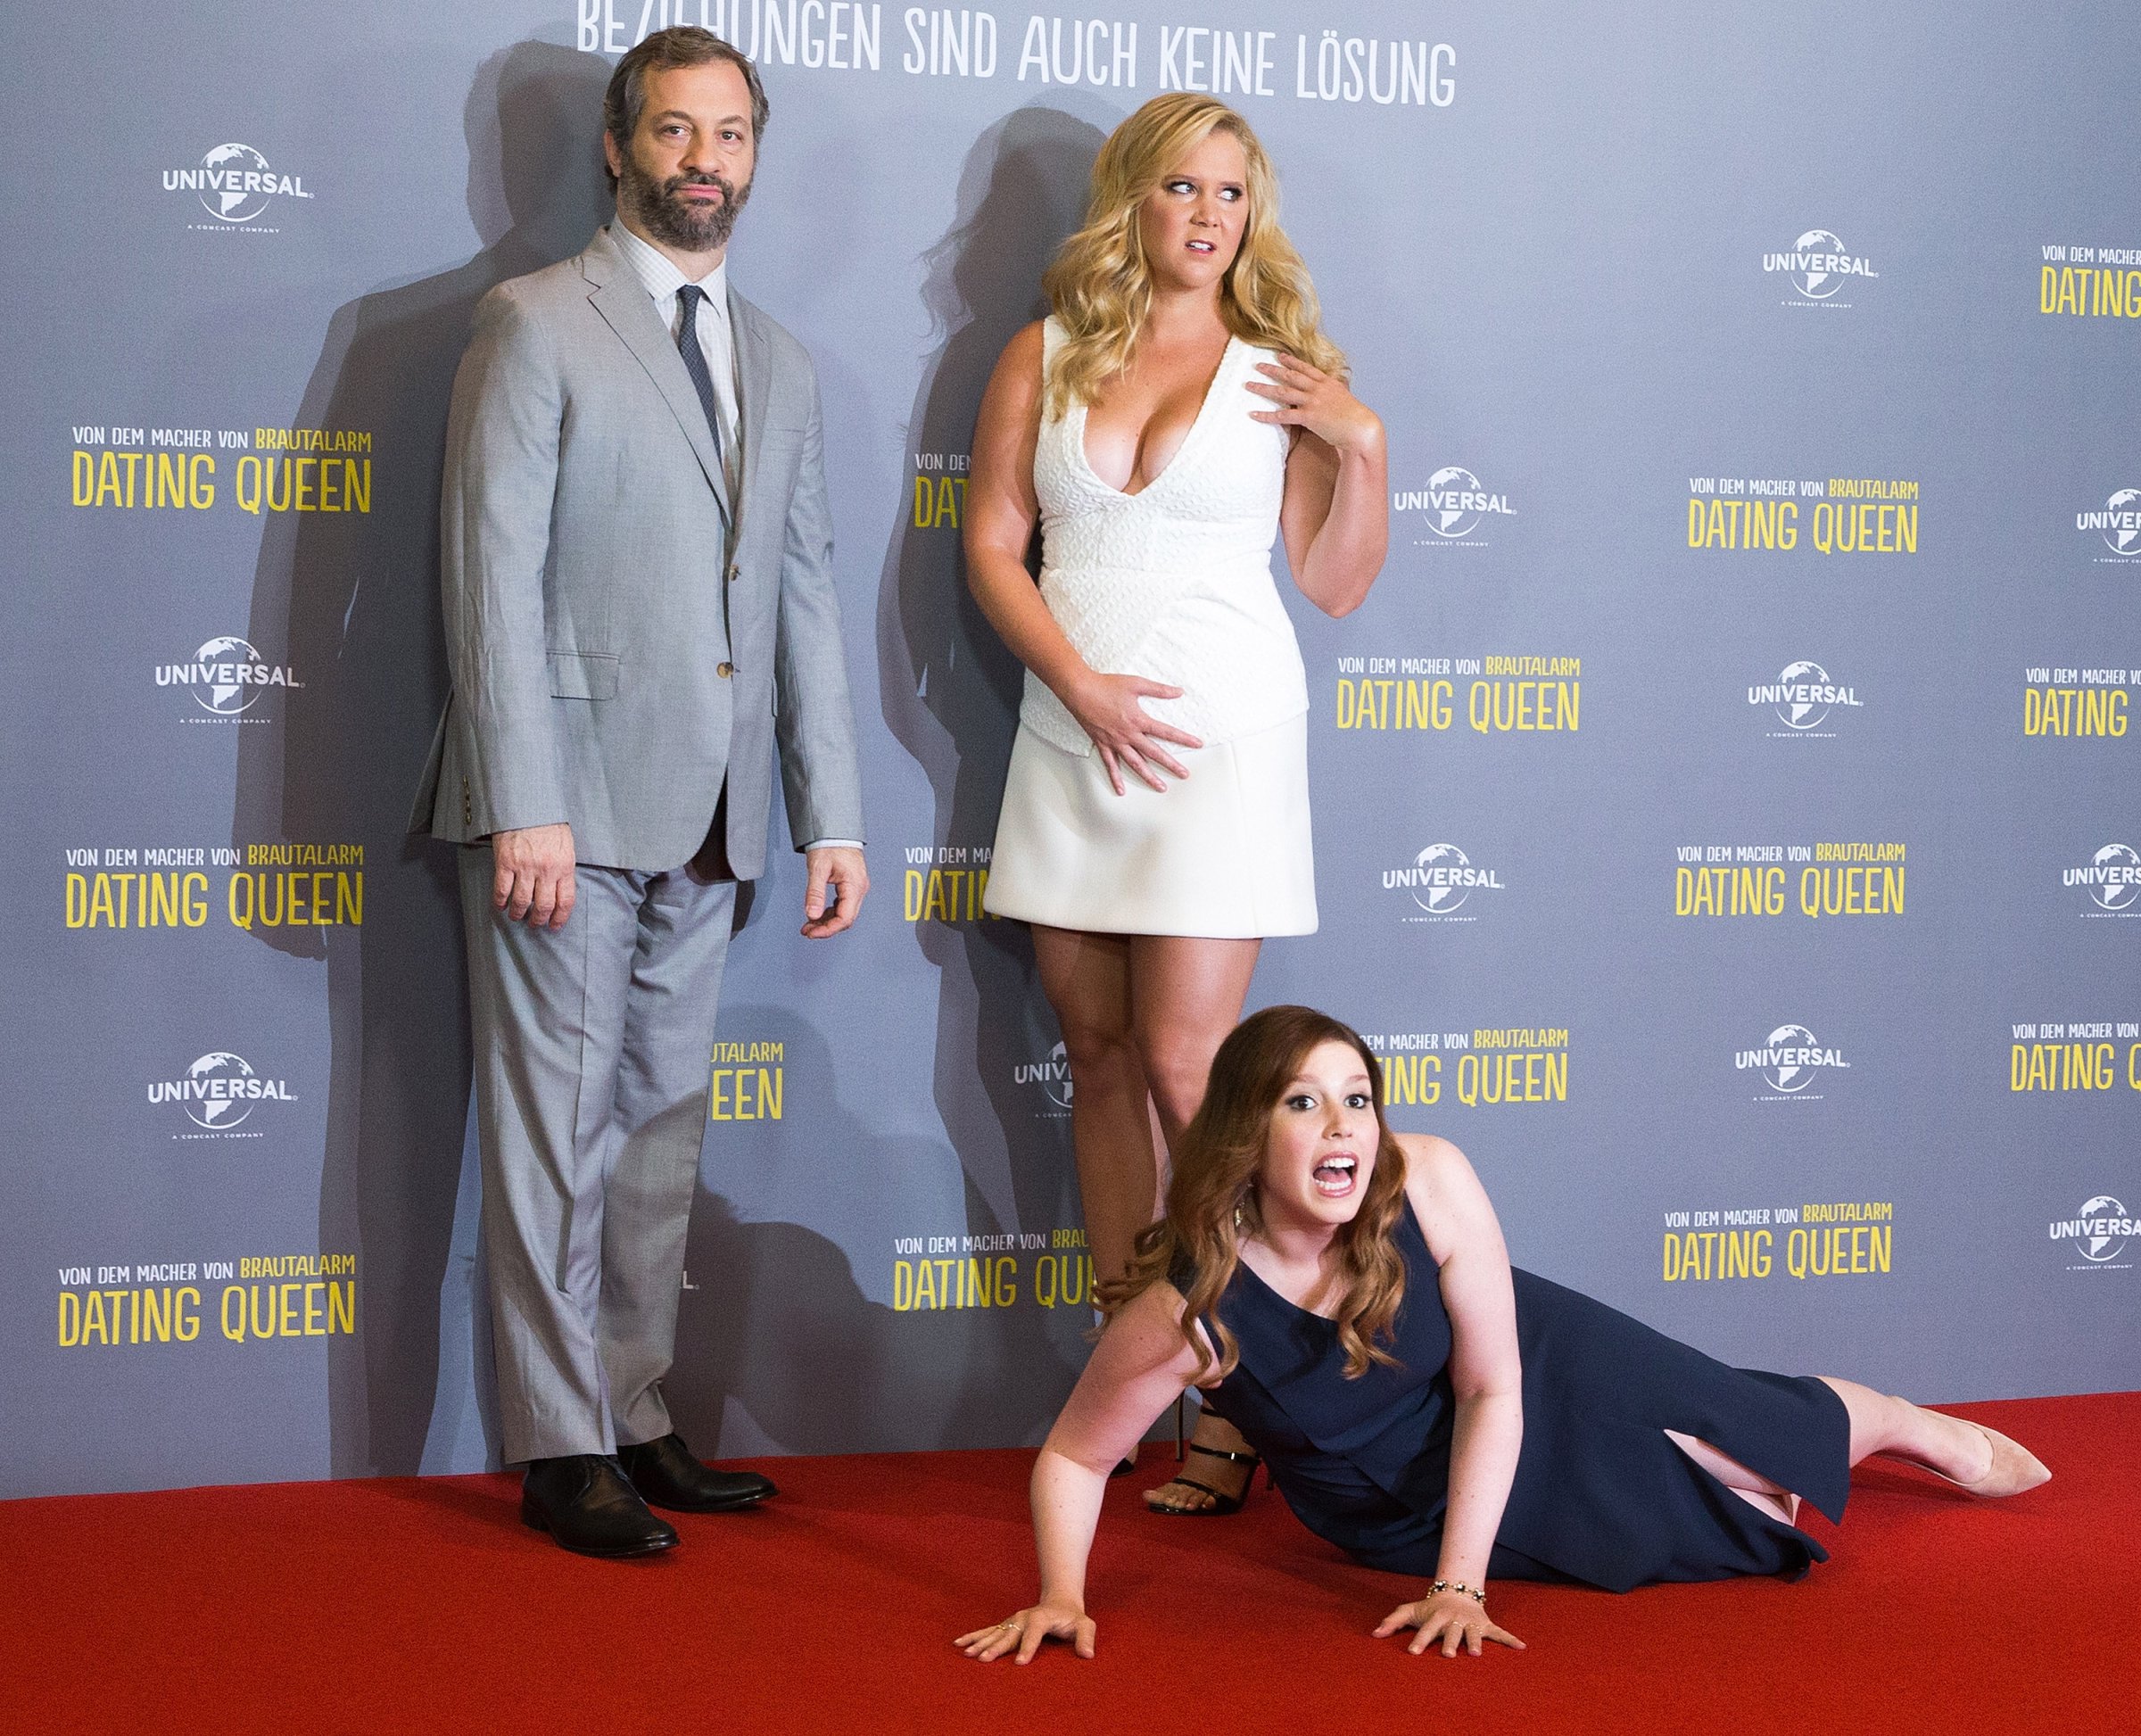 BERLIN, GERMANY - AUGUST 11: Amy Schumer; Vanessa Bayer and Bill Hader attend a photo call for the film 'Dating Queen' at Ritz Carlton on August 11, 2015 in Berlin, Germany.  (Photo by Luca Teuchmann/Getty Images)